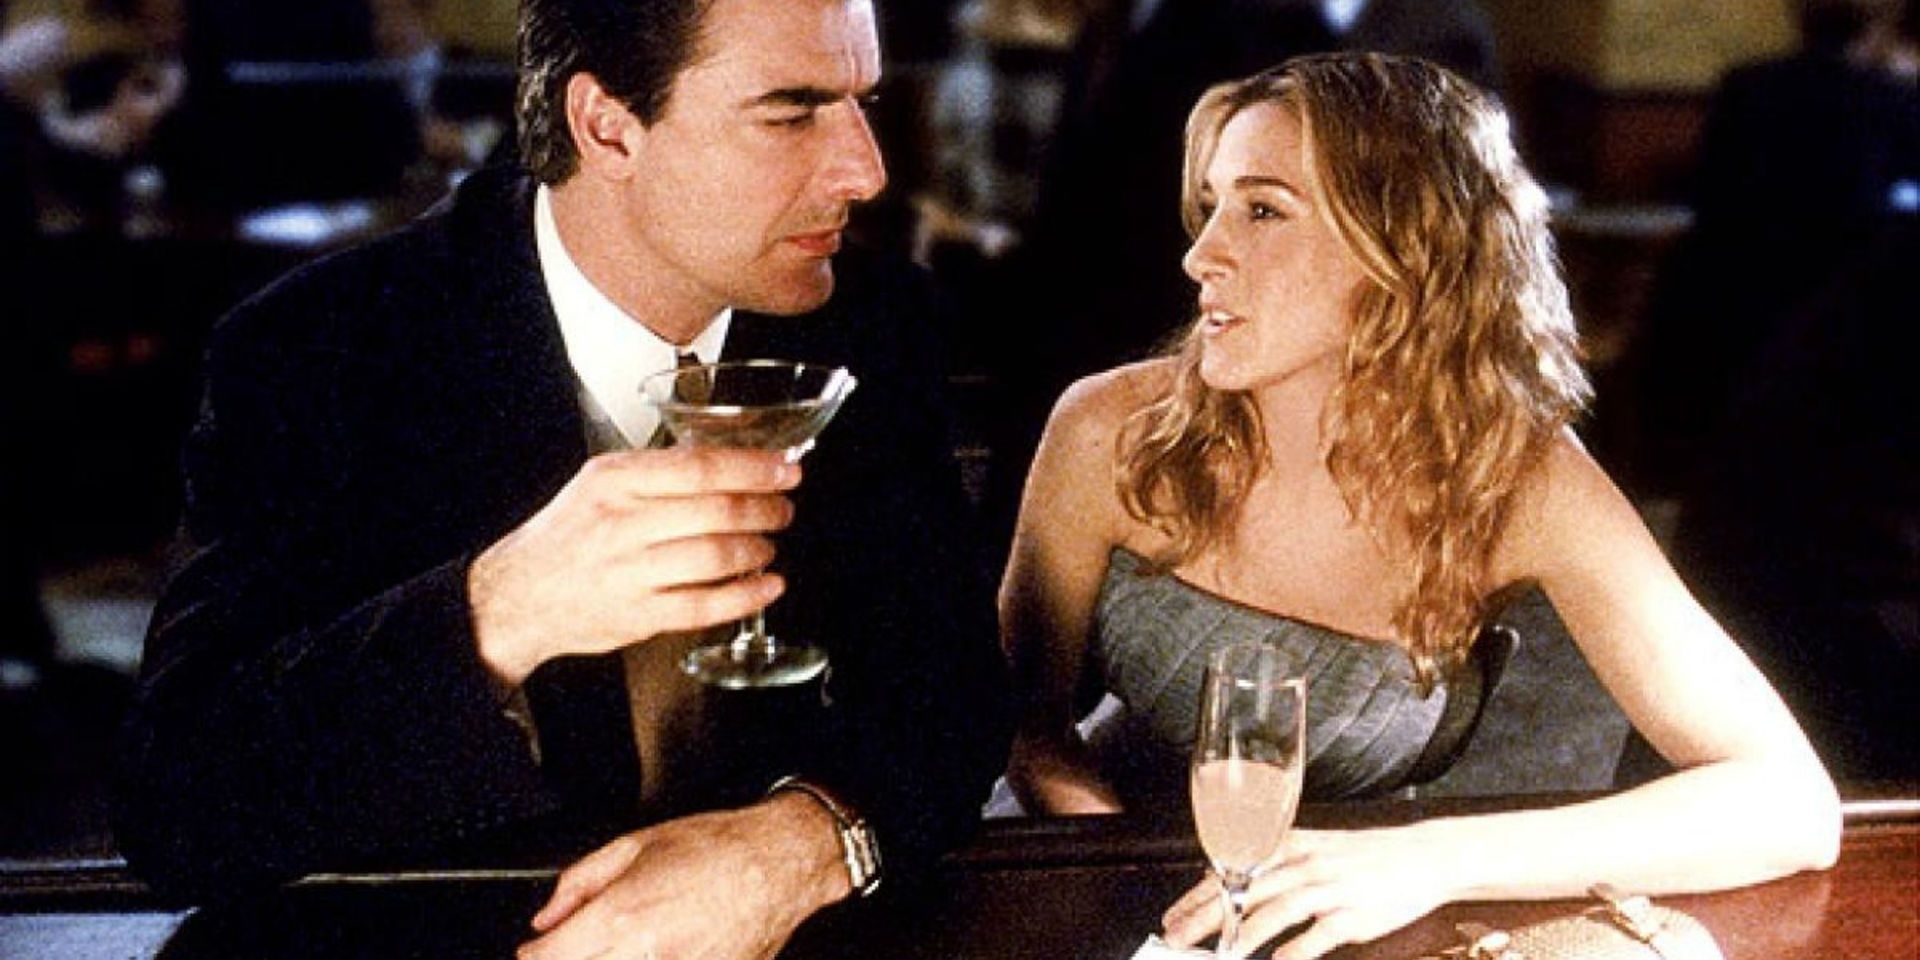 Sex And The City: 10 Ways Carrie Bradshaw’s Character Hasn’t Aged Well